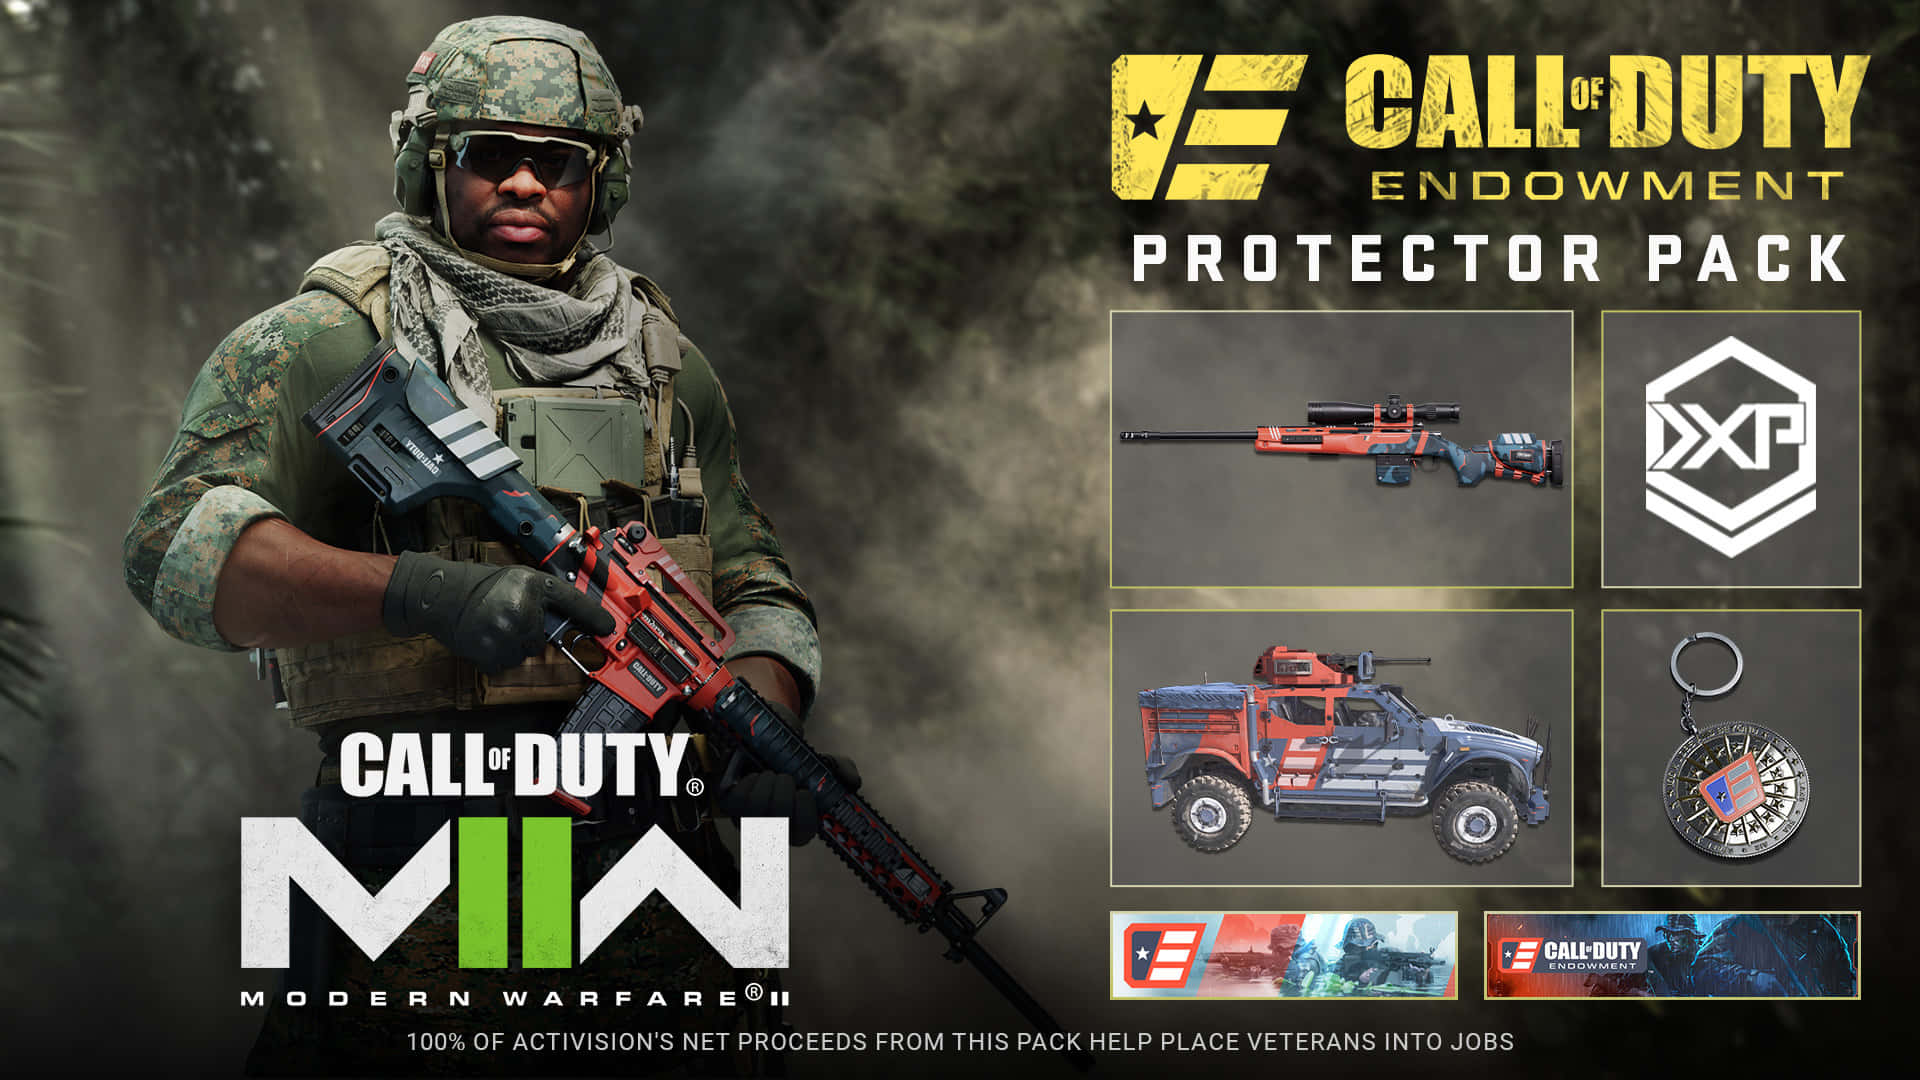 call of duty endgame protector pack